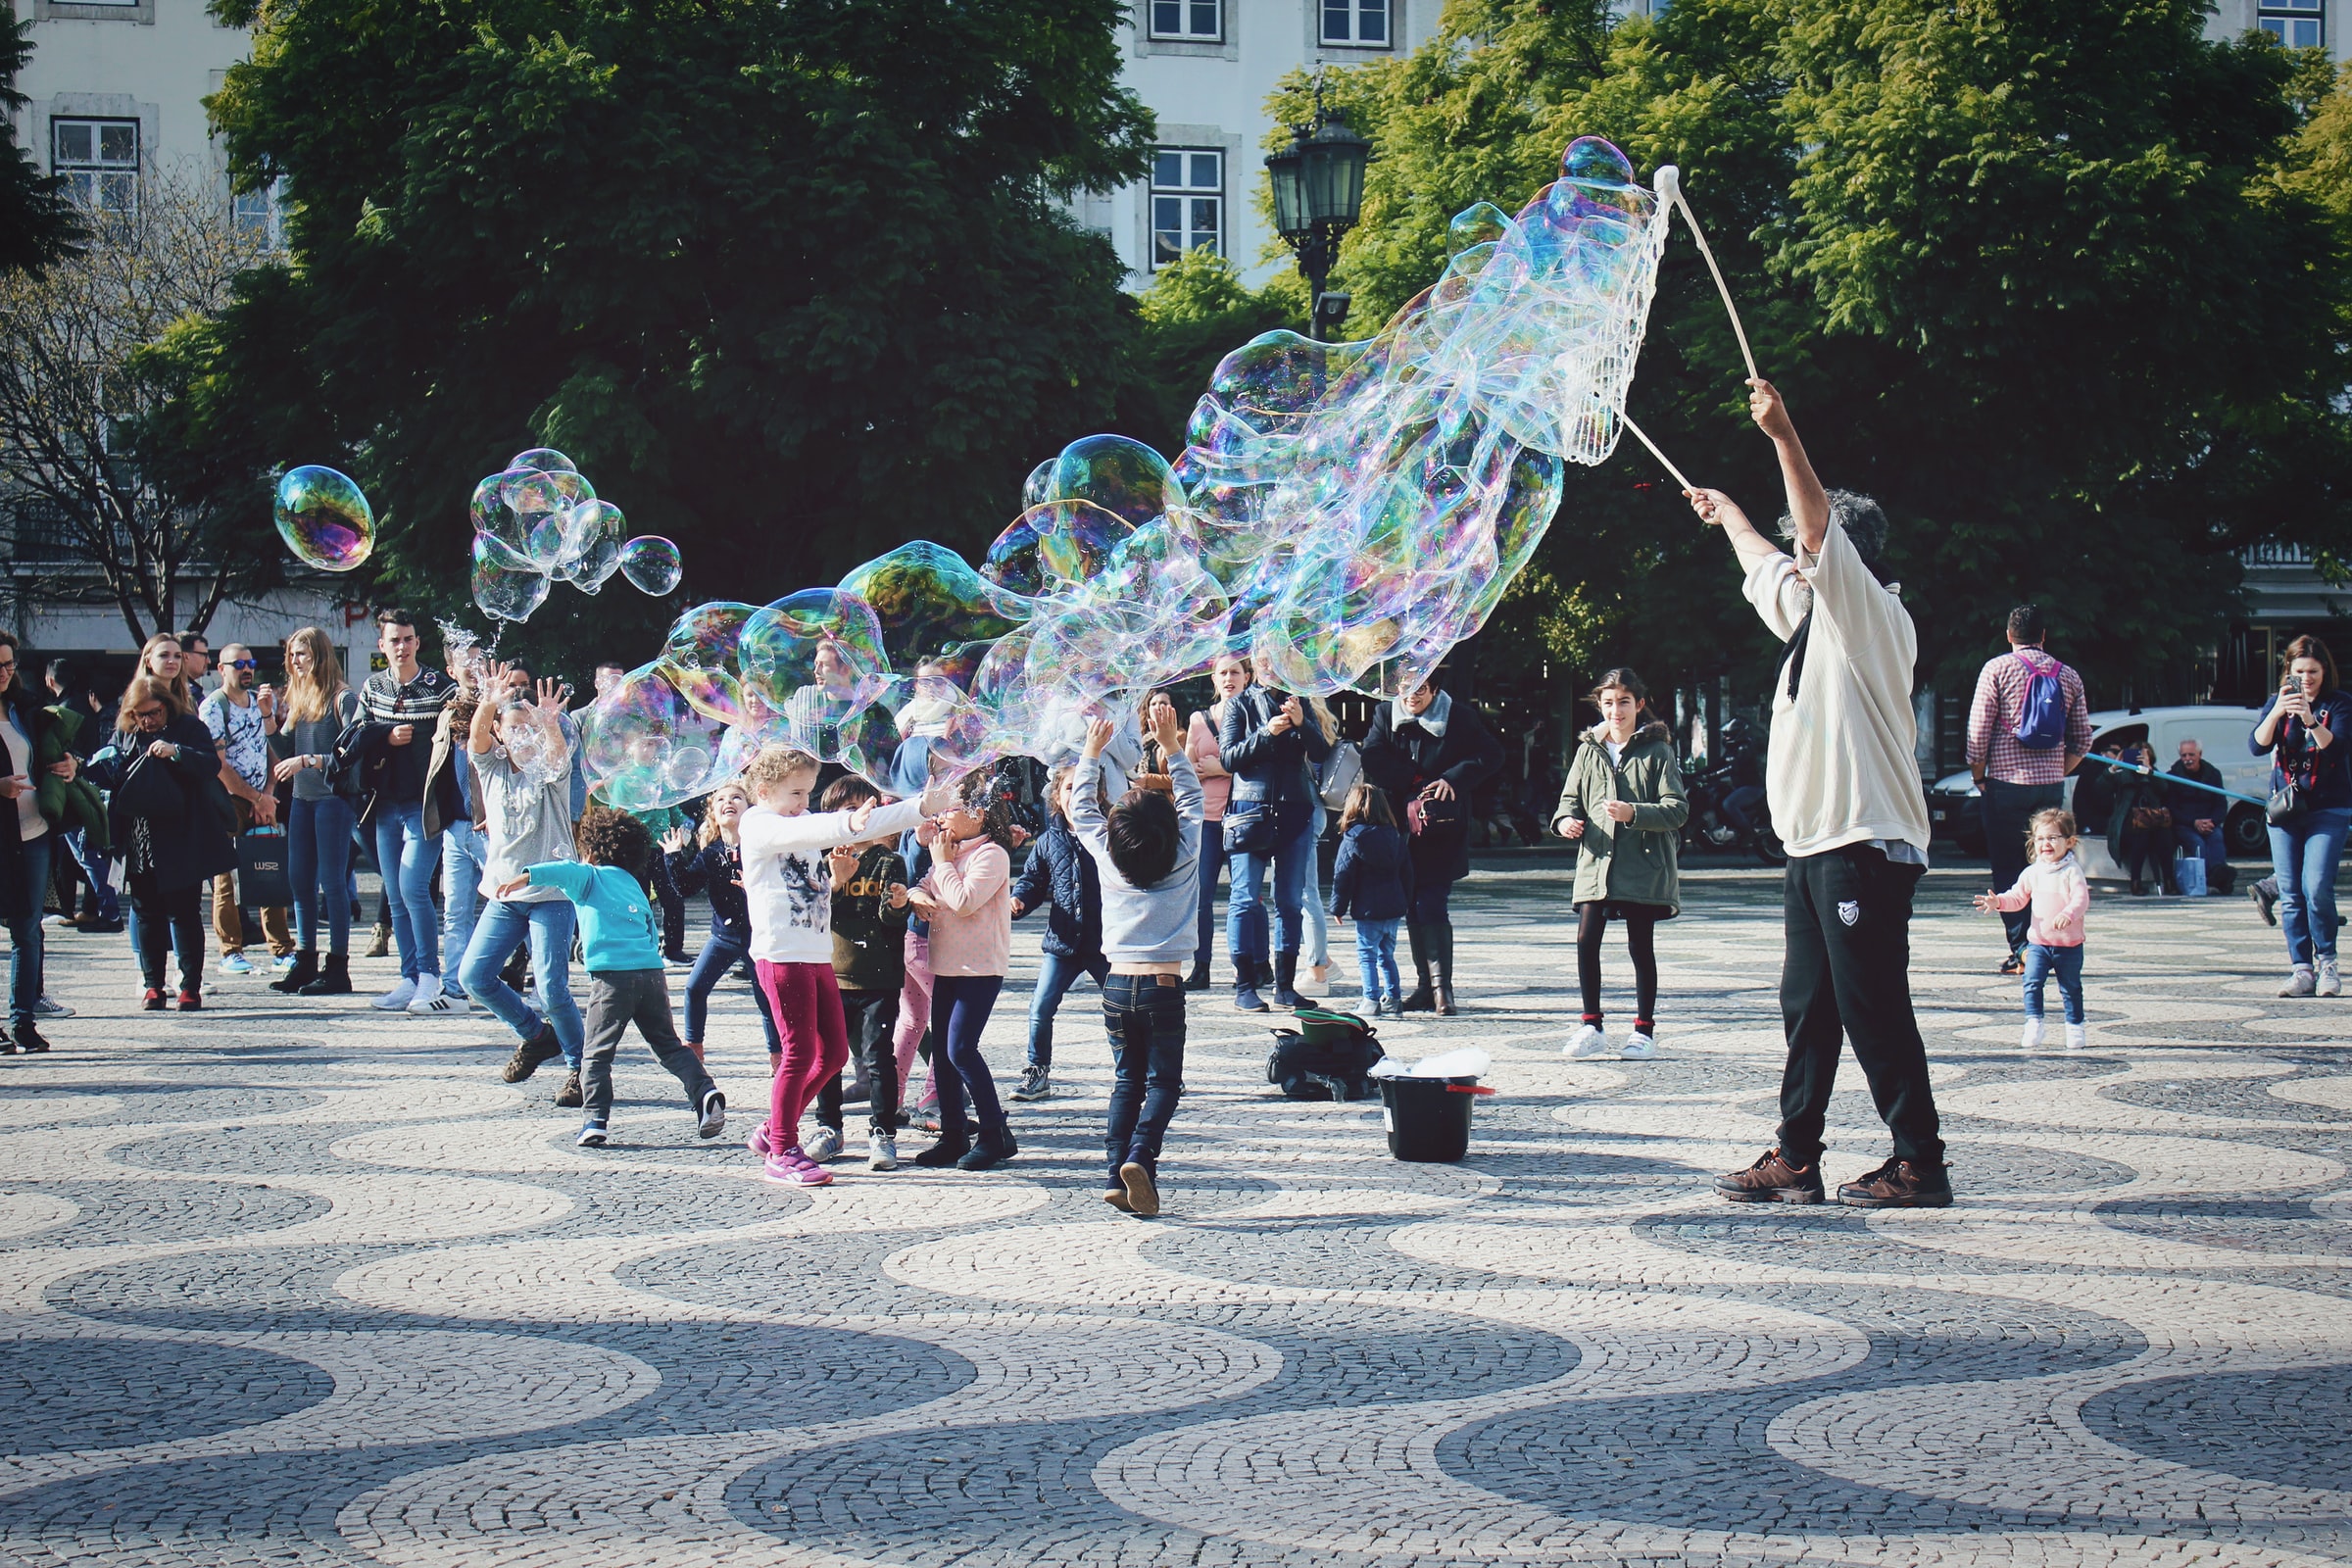 Kids playing with large bubbles.